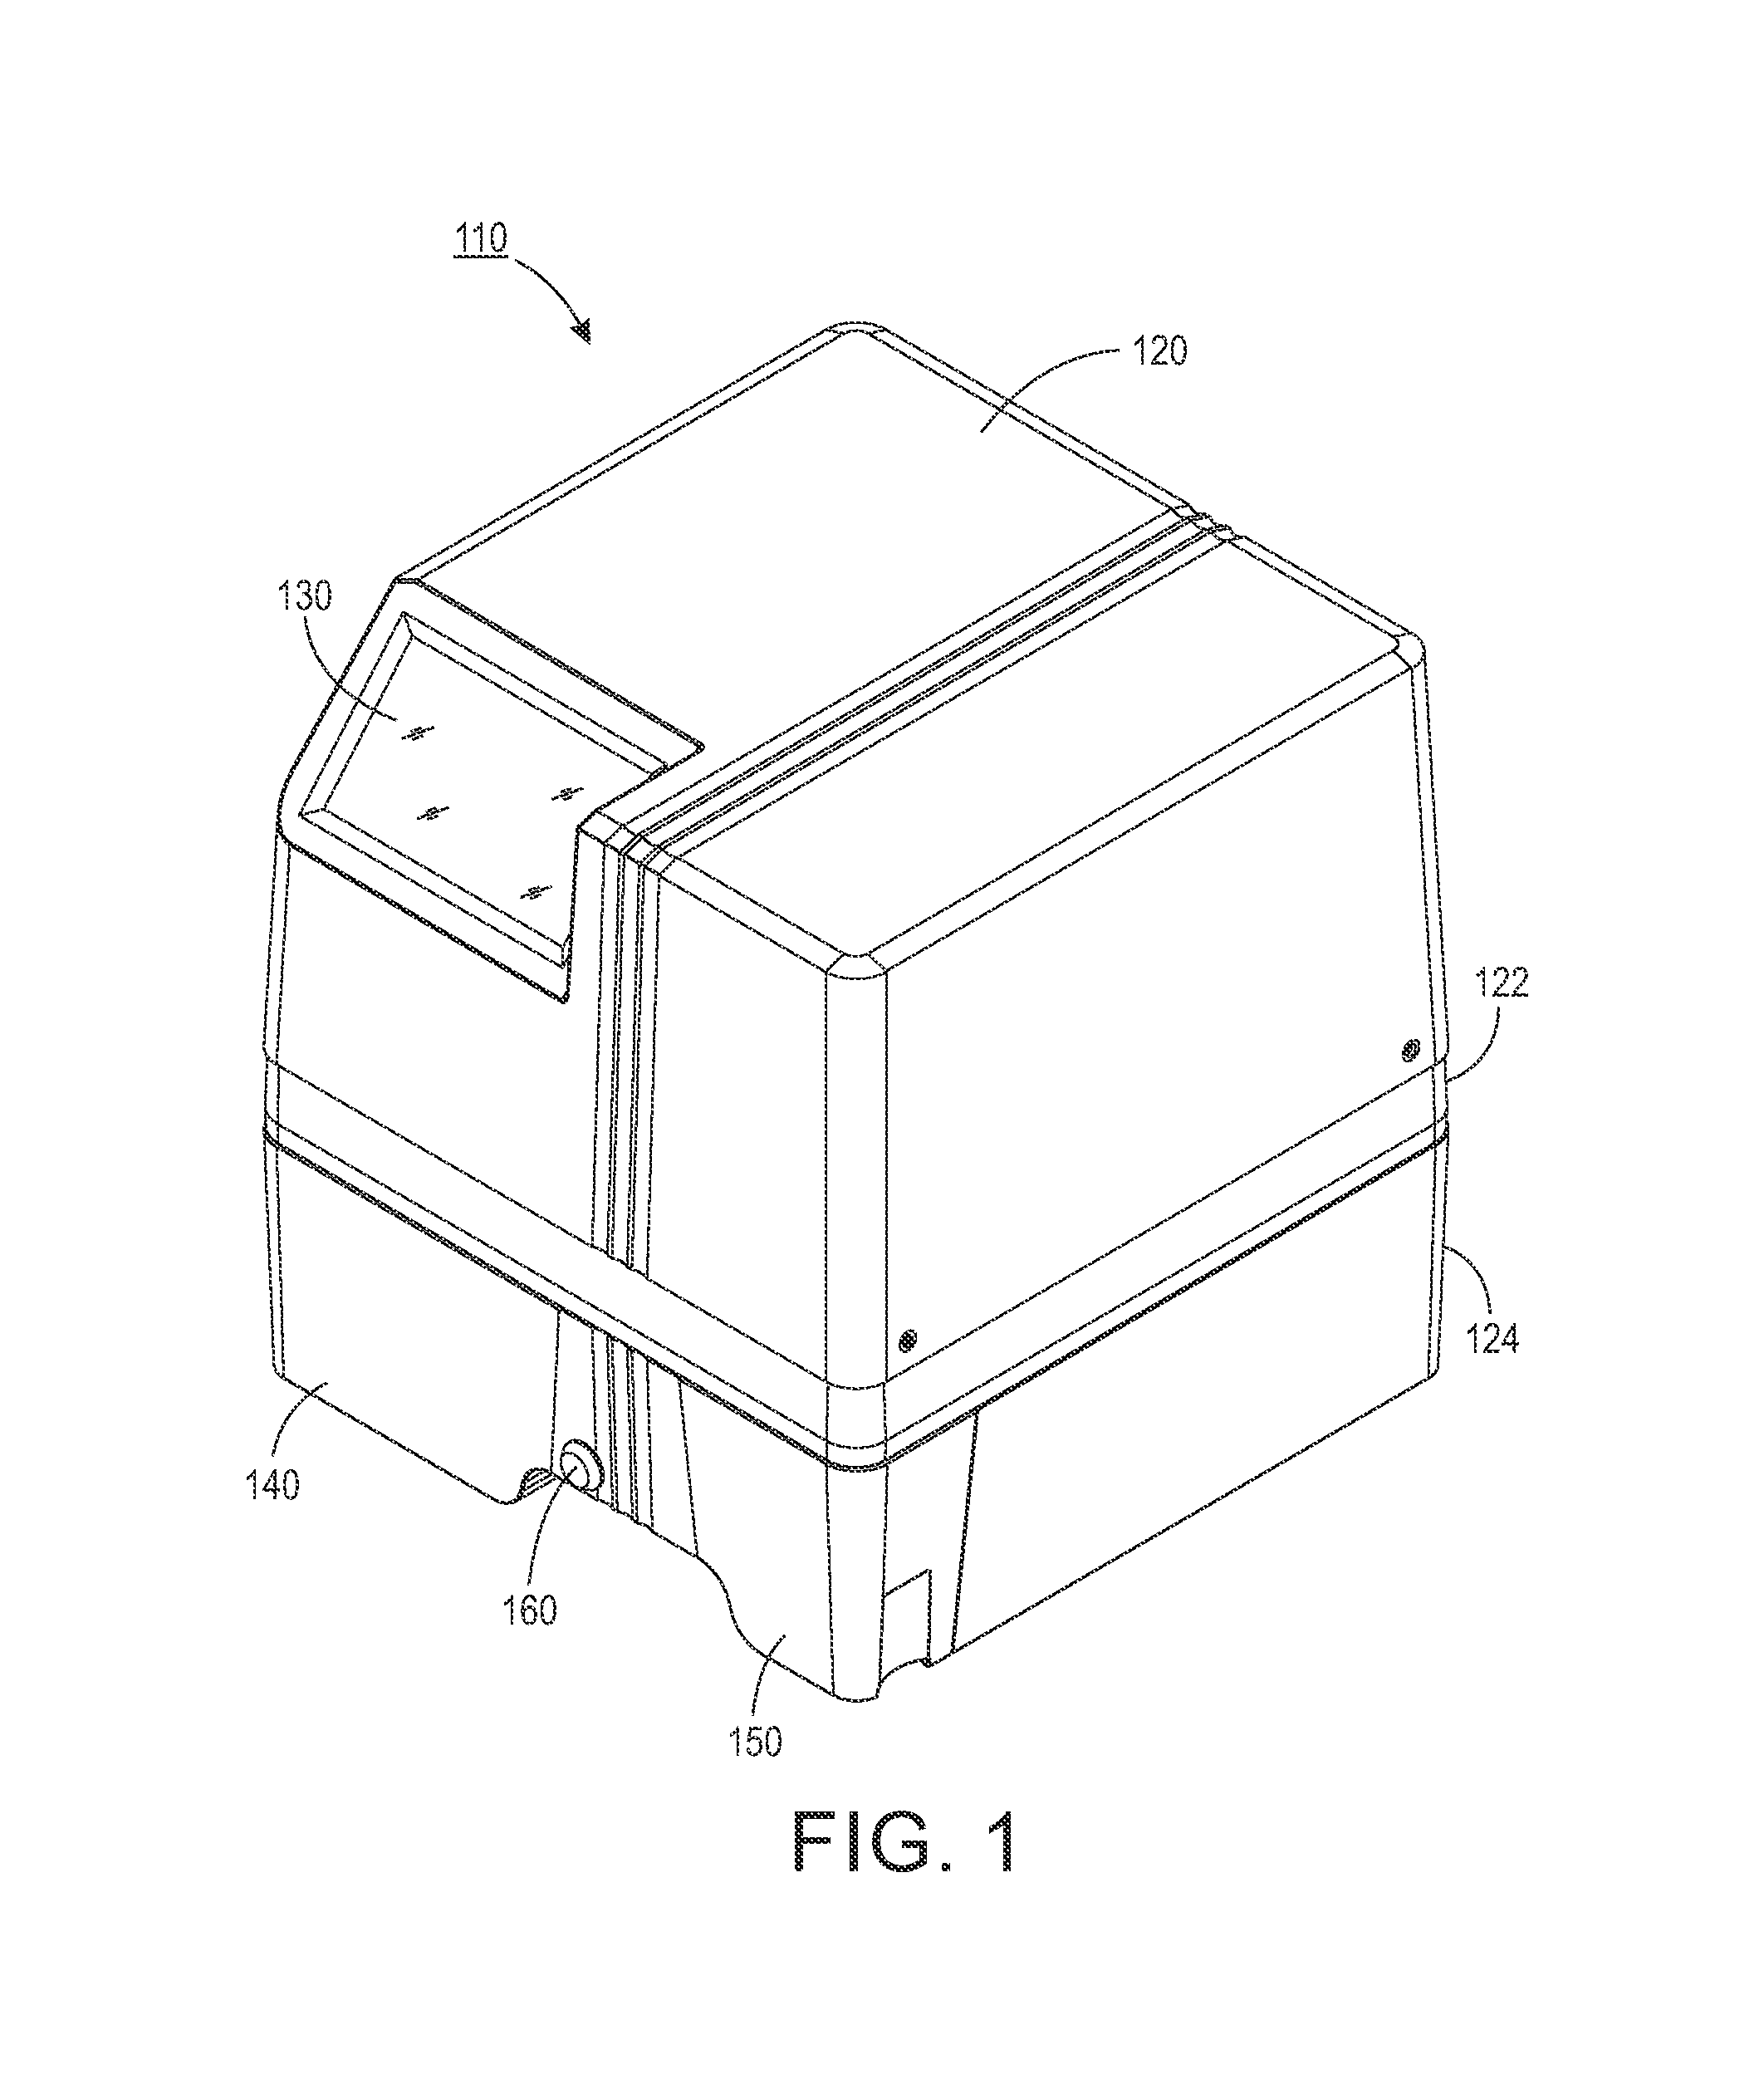 Object dispenser having a variable orifice and image identification